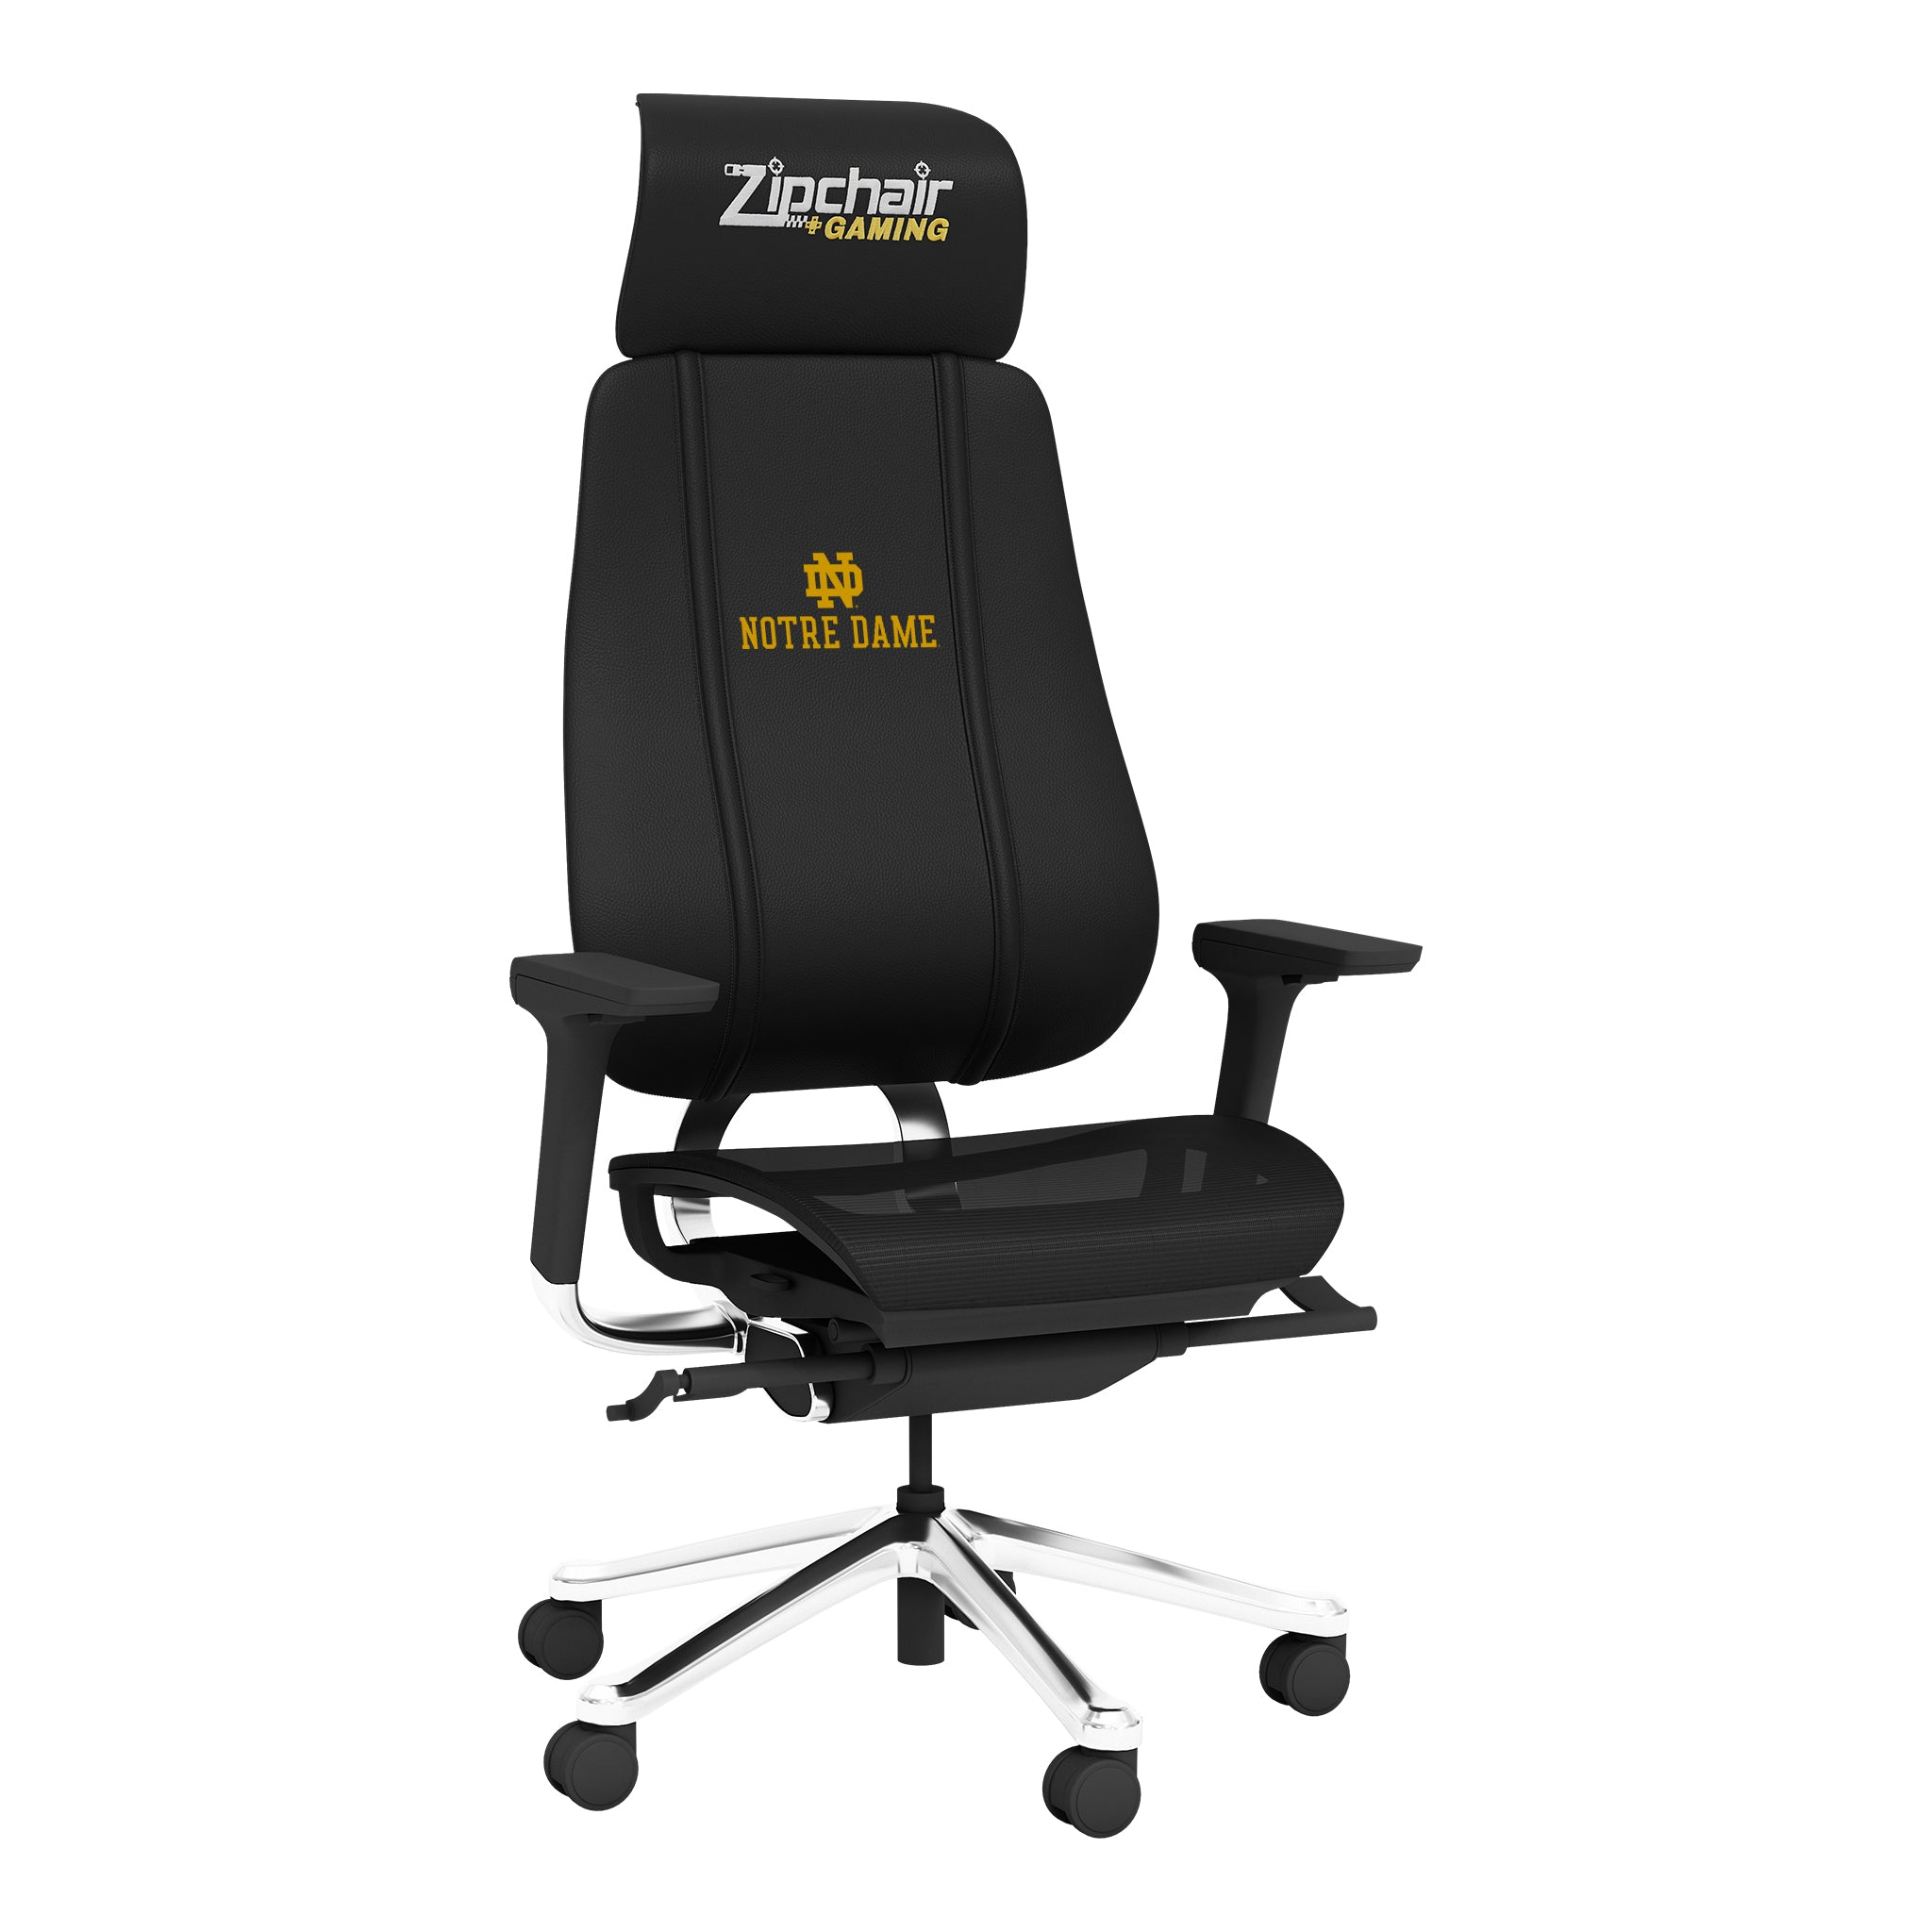 Notre Dame PhantomX Mesh Gaming Chair with Notre Dame Wordmark Logo